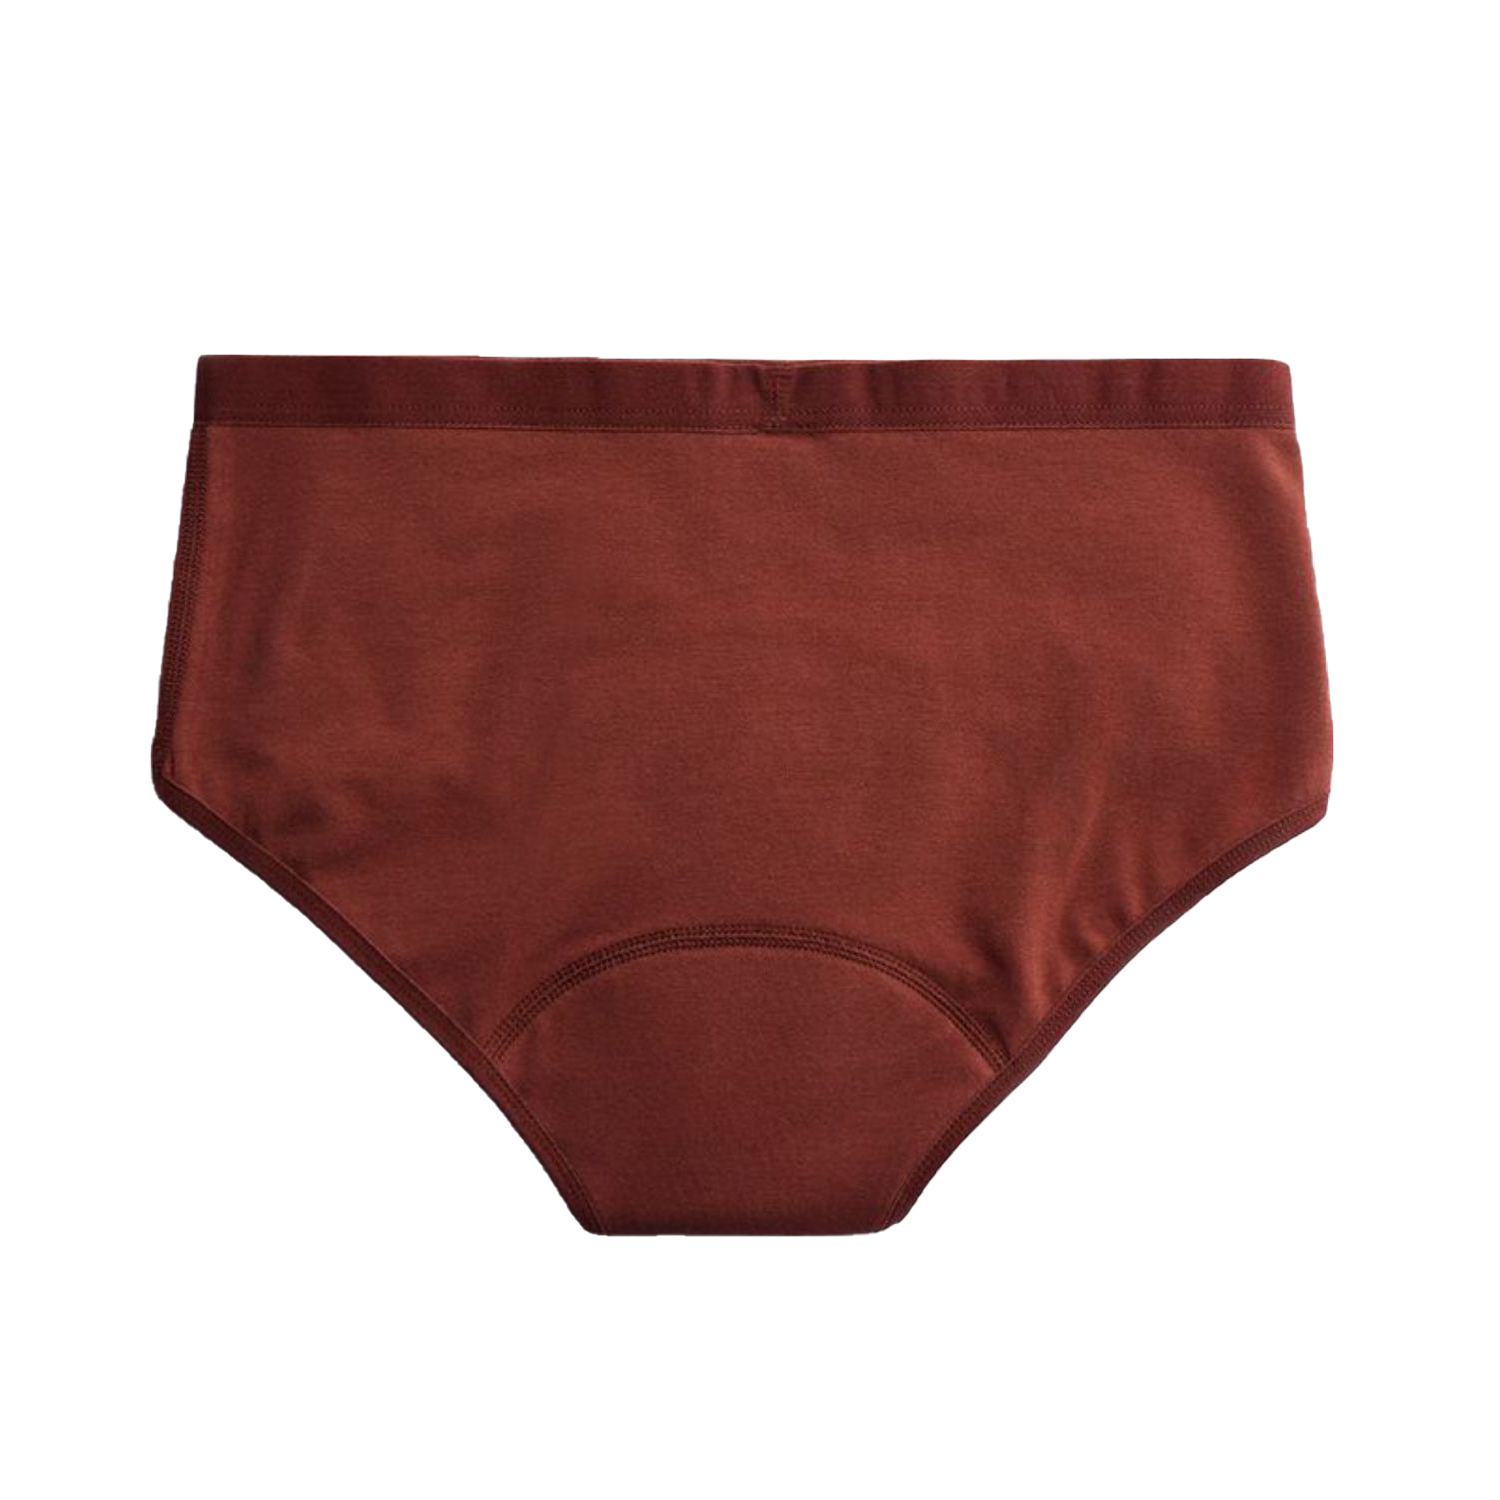 Imse (by ImseVimse) Period Underwear – Hipster Medium Flow (Size: S / Color: Rusty Bordeaux)